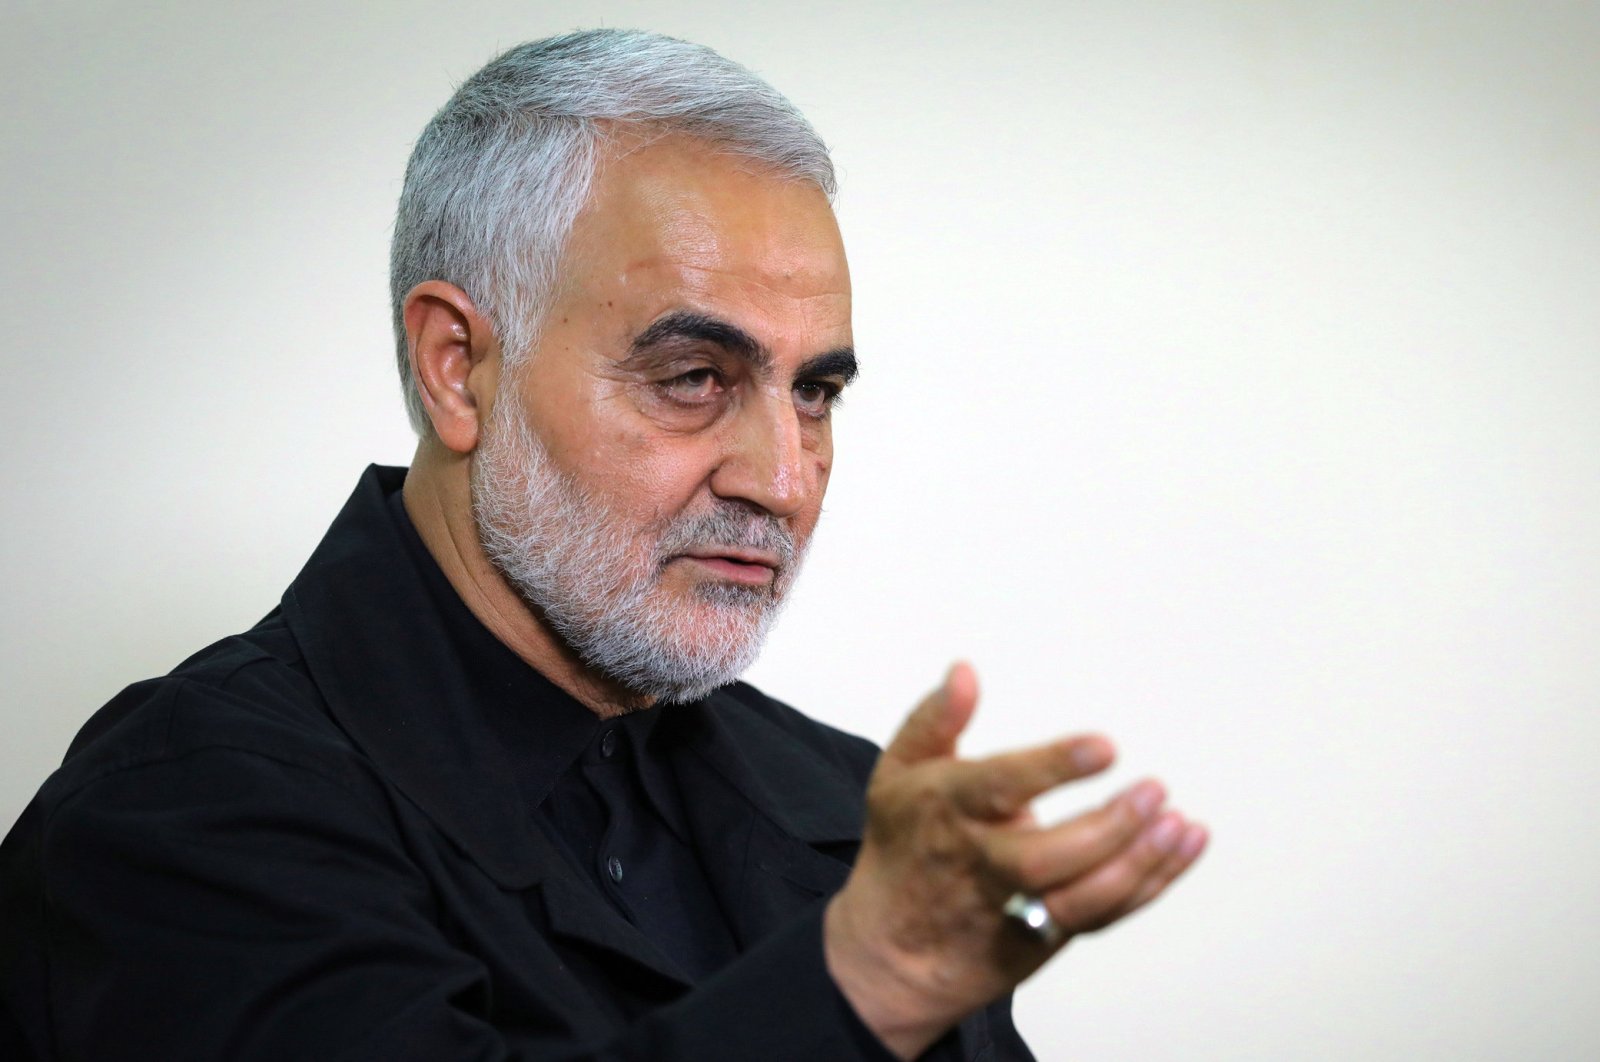 Qasem Soleimani, Iranian Revolutionary Guards Corps (IRGC) major general and commander of the Quds Force, speaking during an interview with members of the Iranian leader's bureau in Tehran, Oct. 1, 2019. (AFP Photo/Khamenei.ir)